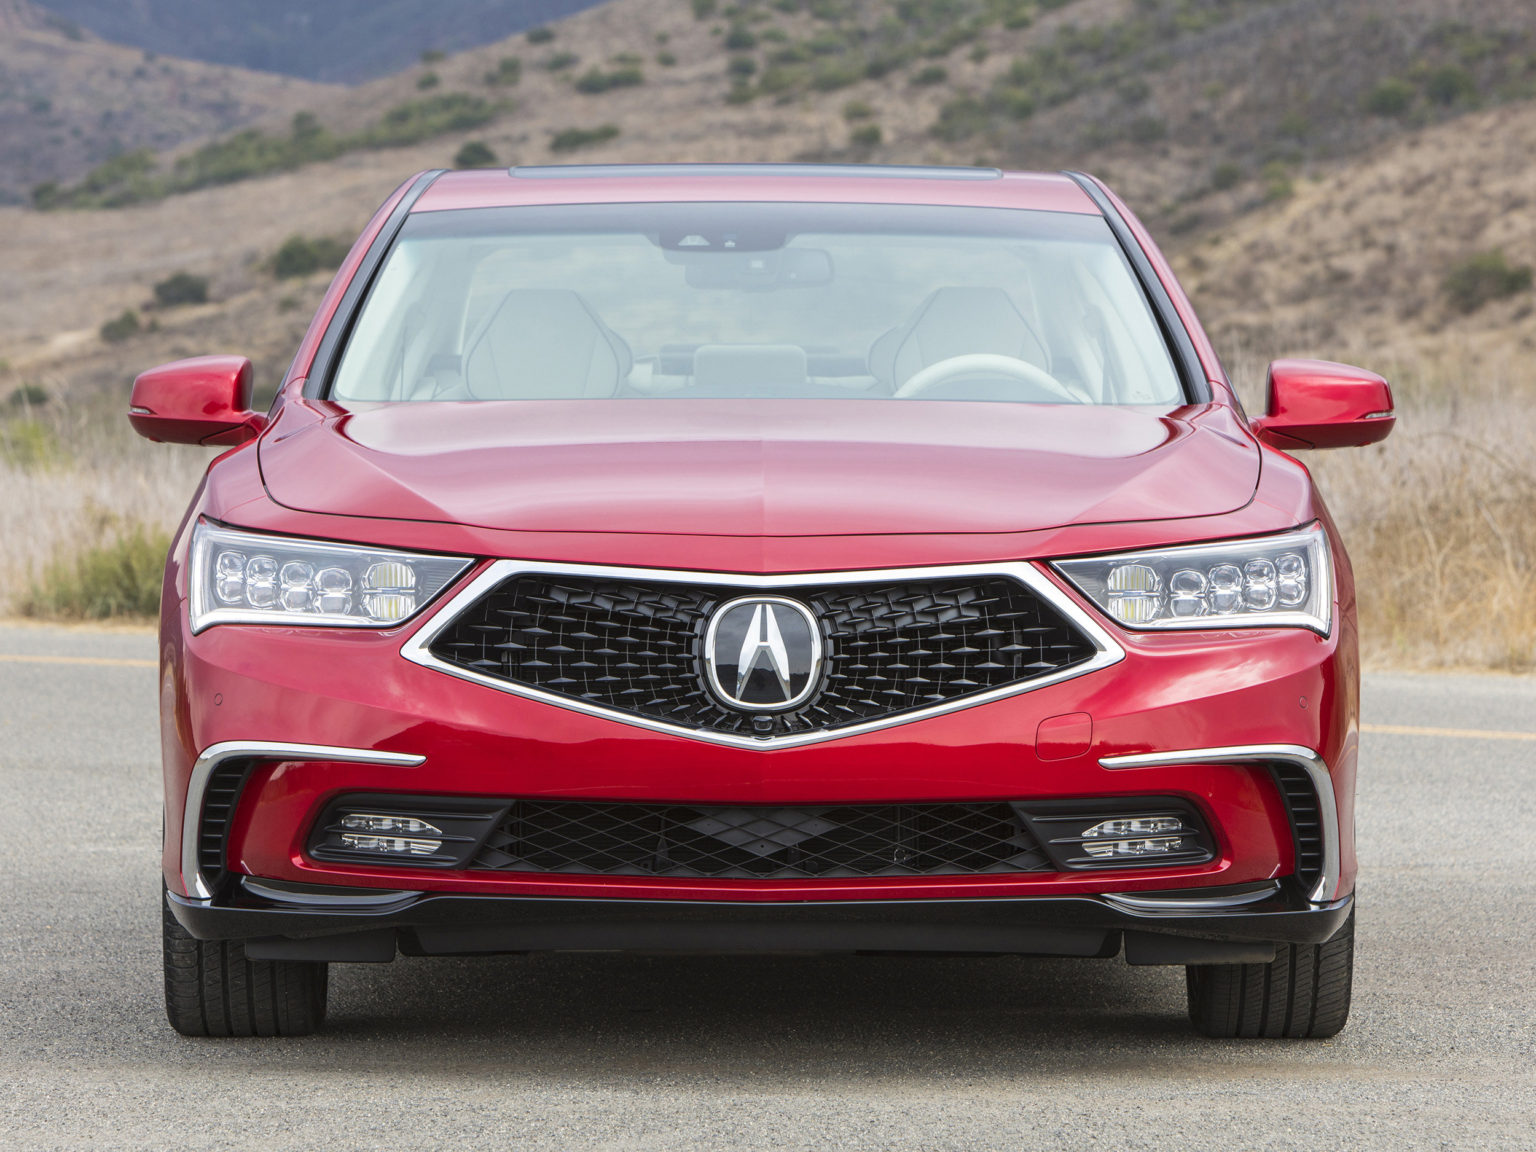 Acura has confirmed that the RLX is going away in the U.S.